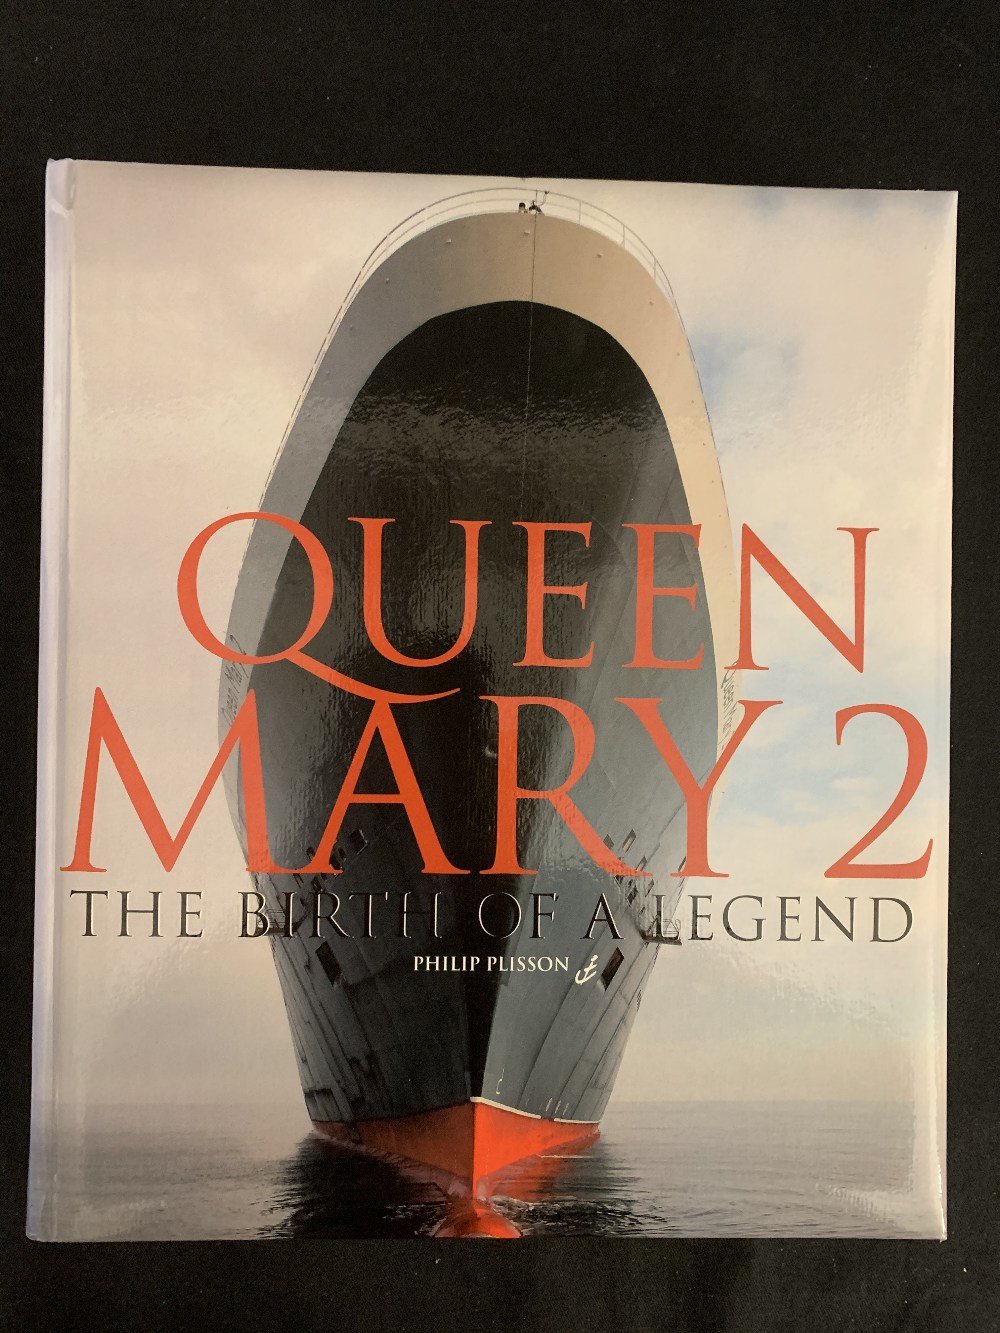 BOOKS: Queen Mary II & Cunard coffee table/reference books to include "Birth of a Legend"